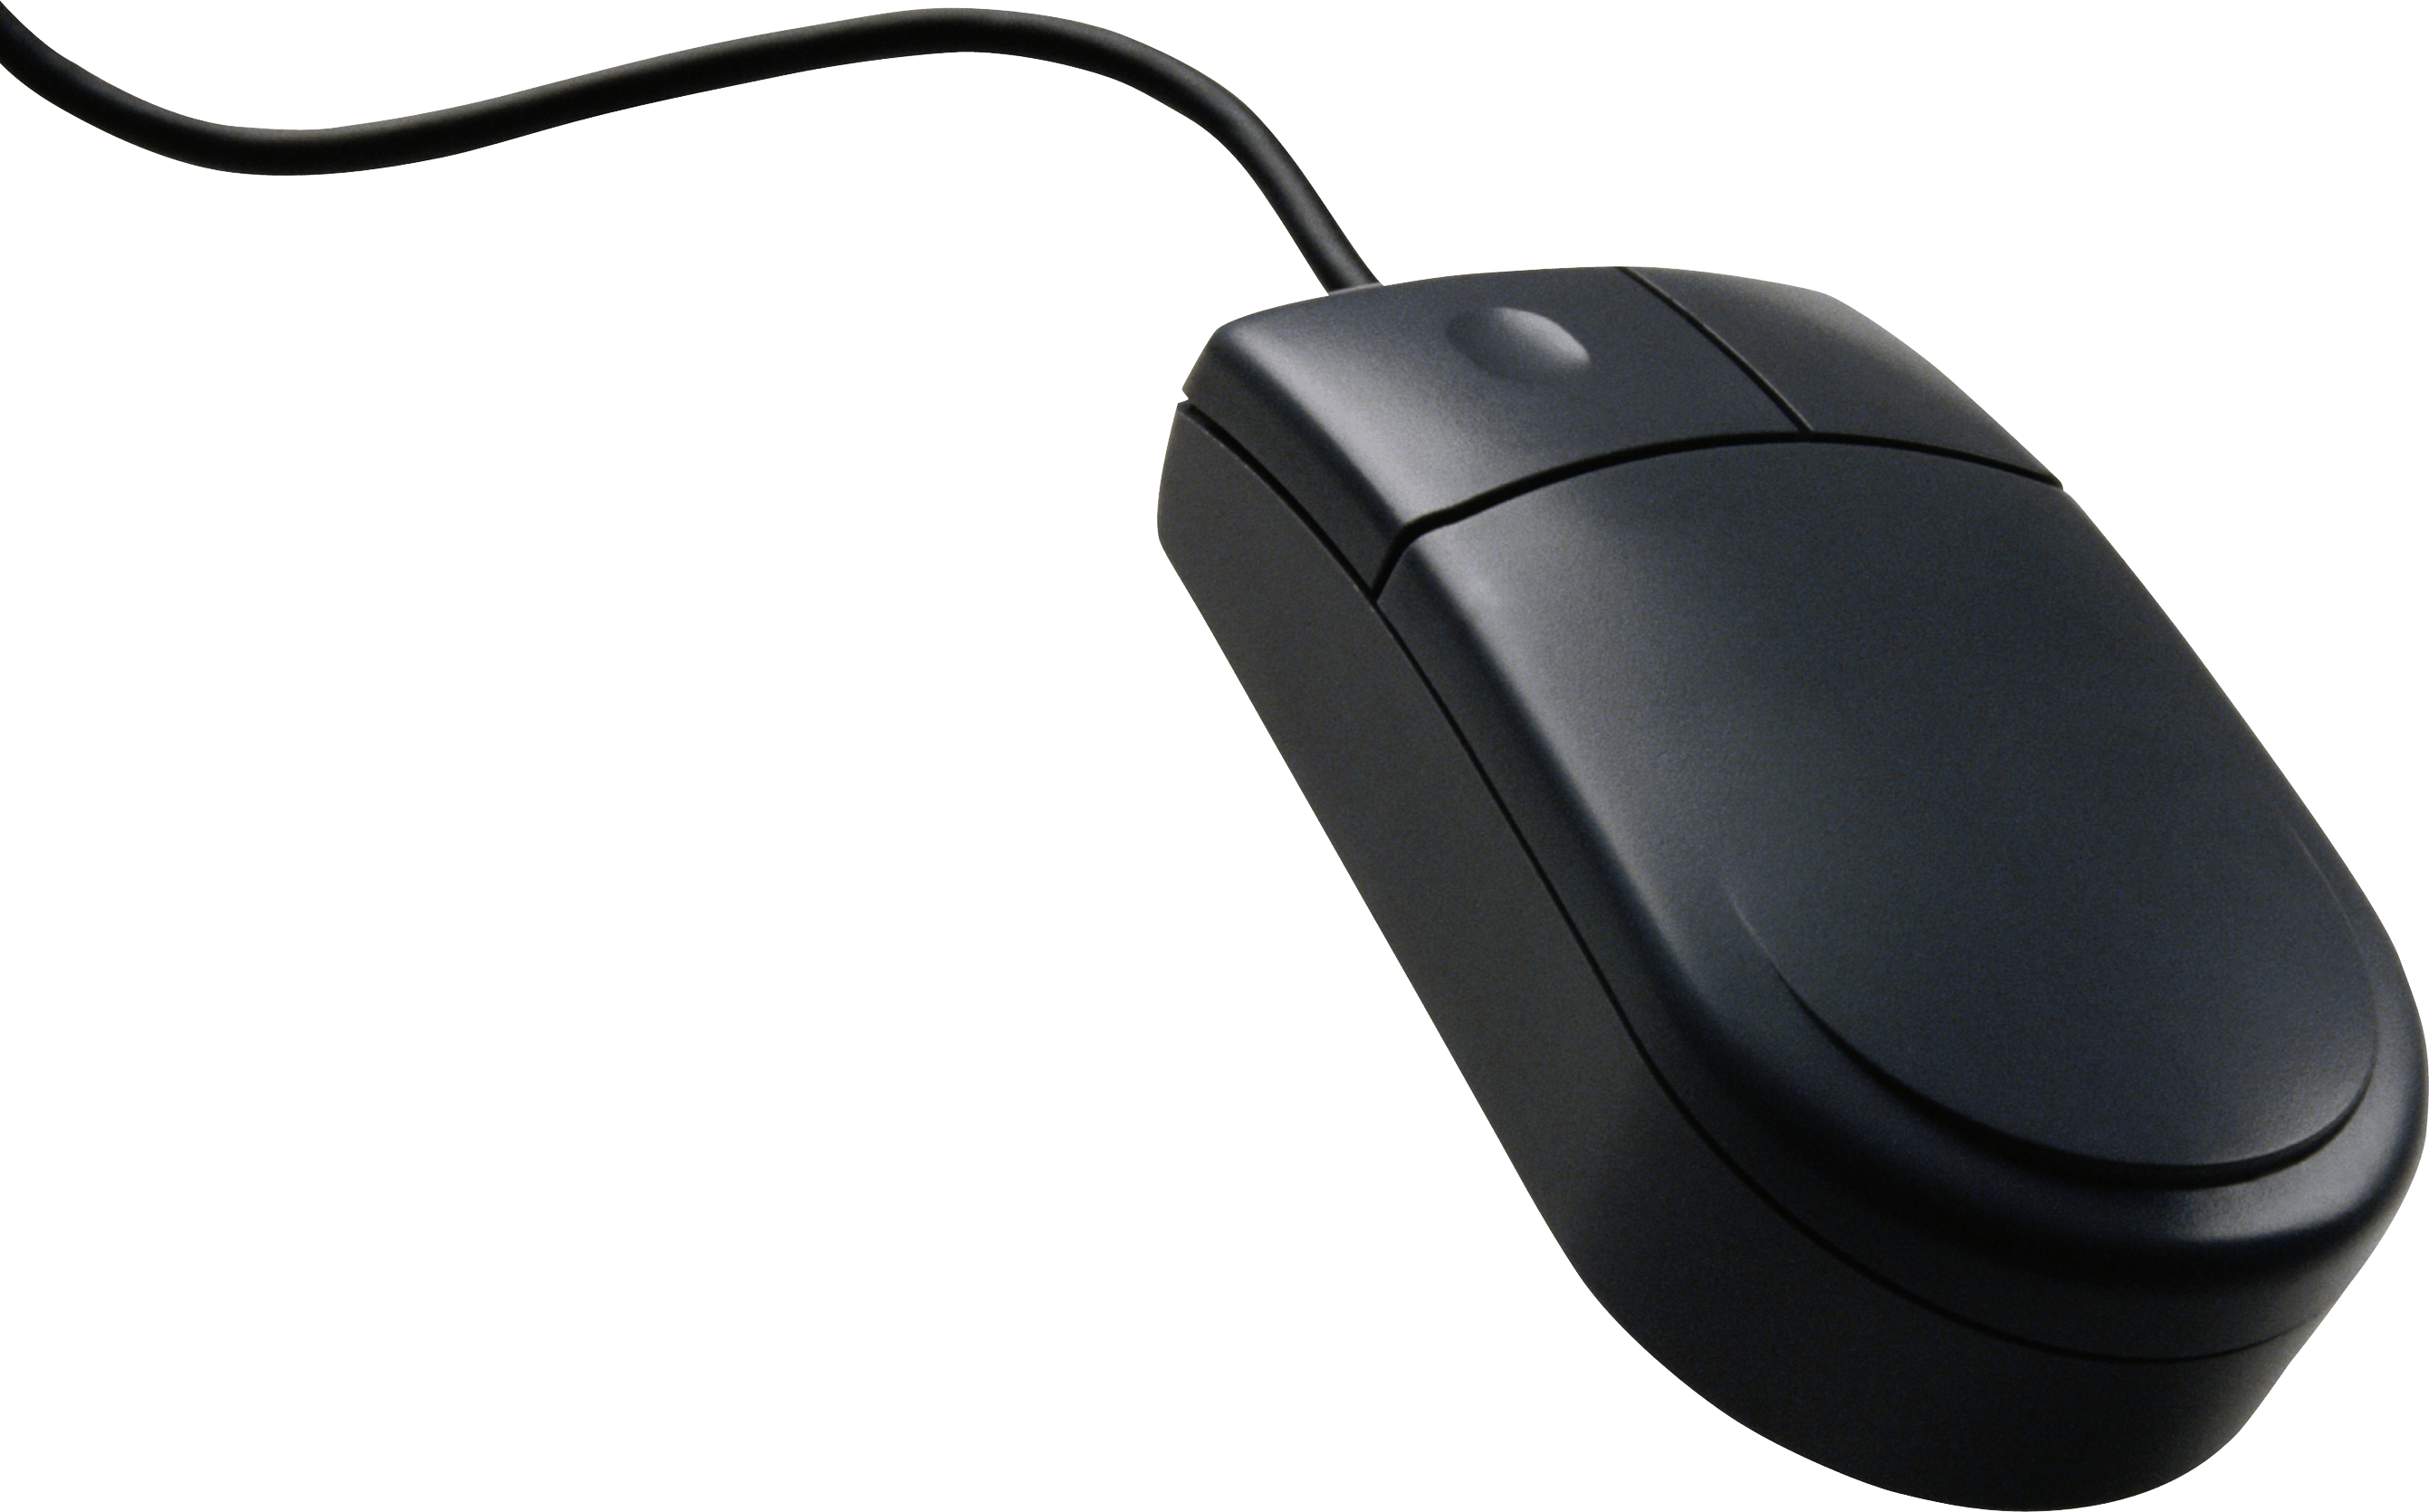 Black Pc Mouse Png Image PNG Image